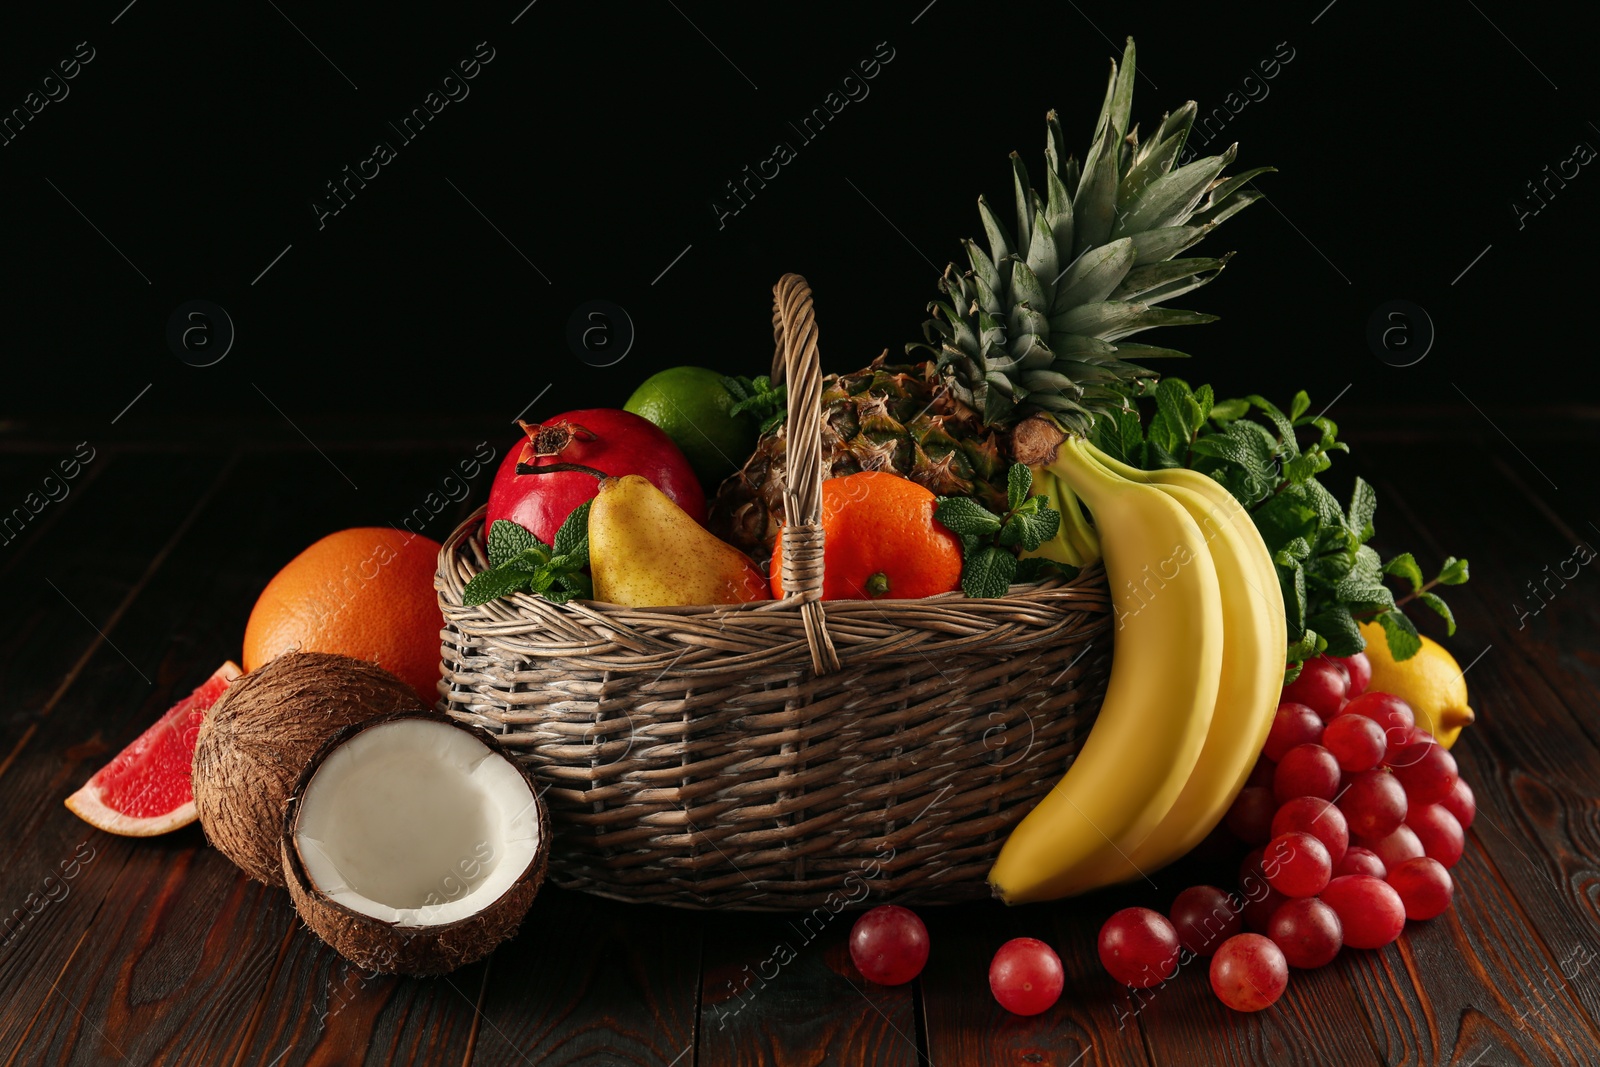 Photo of Wicker basket and different ripe fruits on wooden table against black background